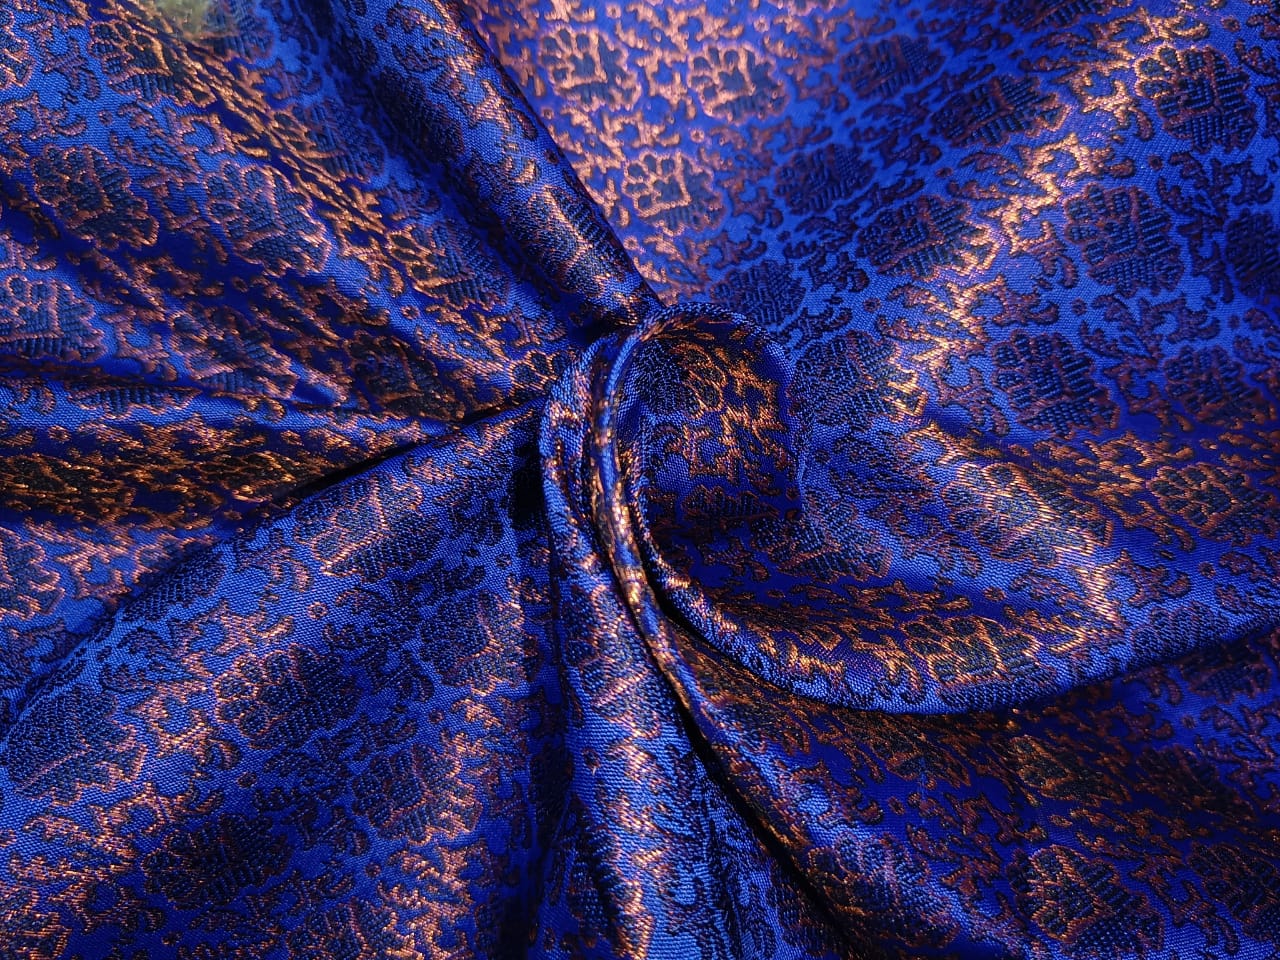 Silk Brocade Fabric 56" wide BRO822 available in two colors royal blue and copper brown